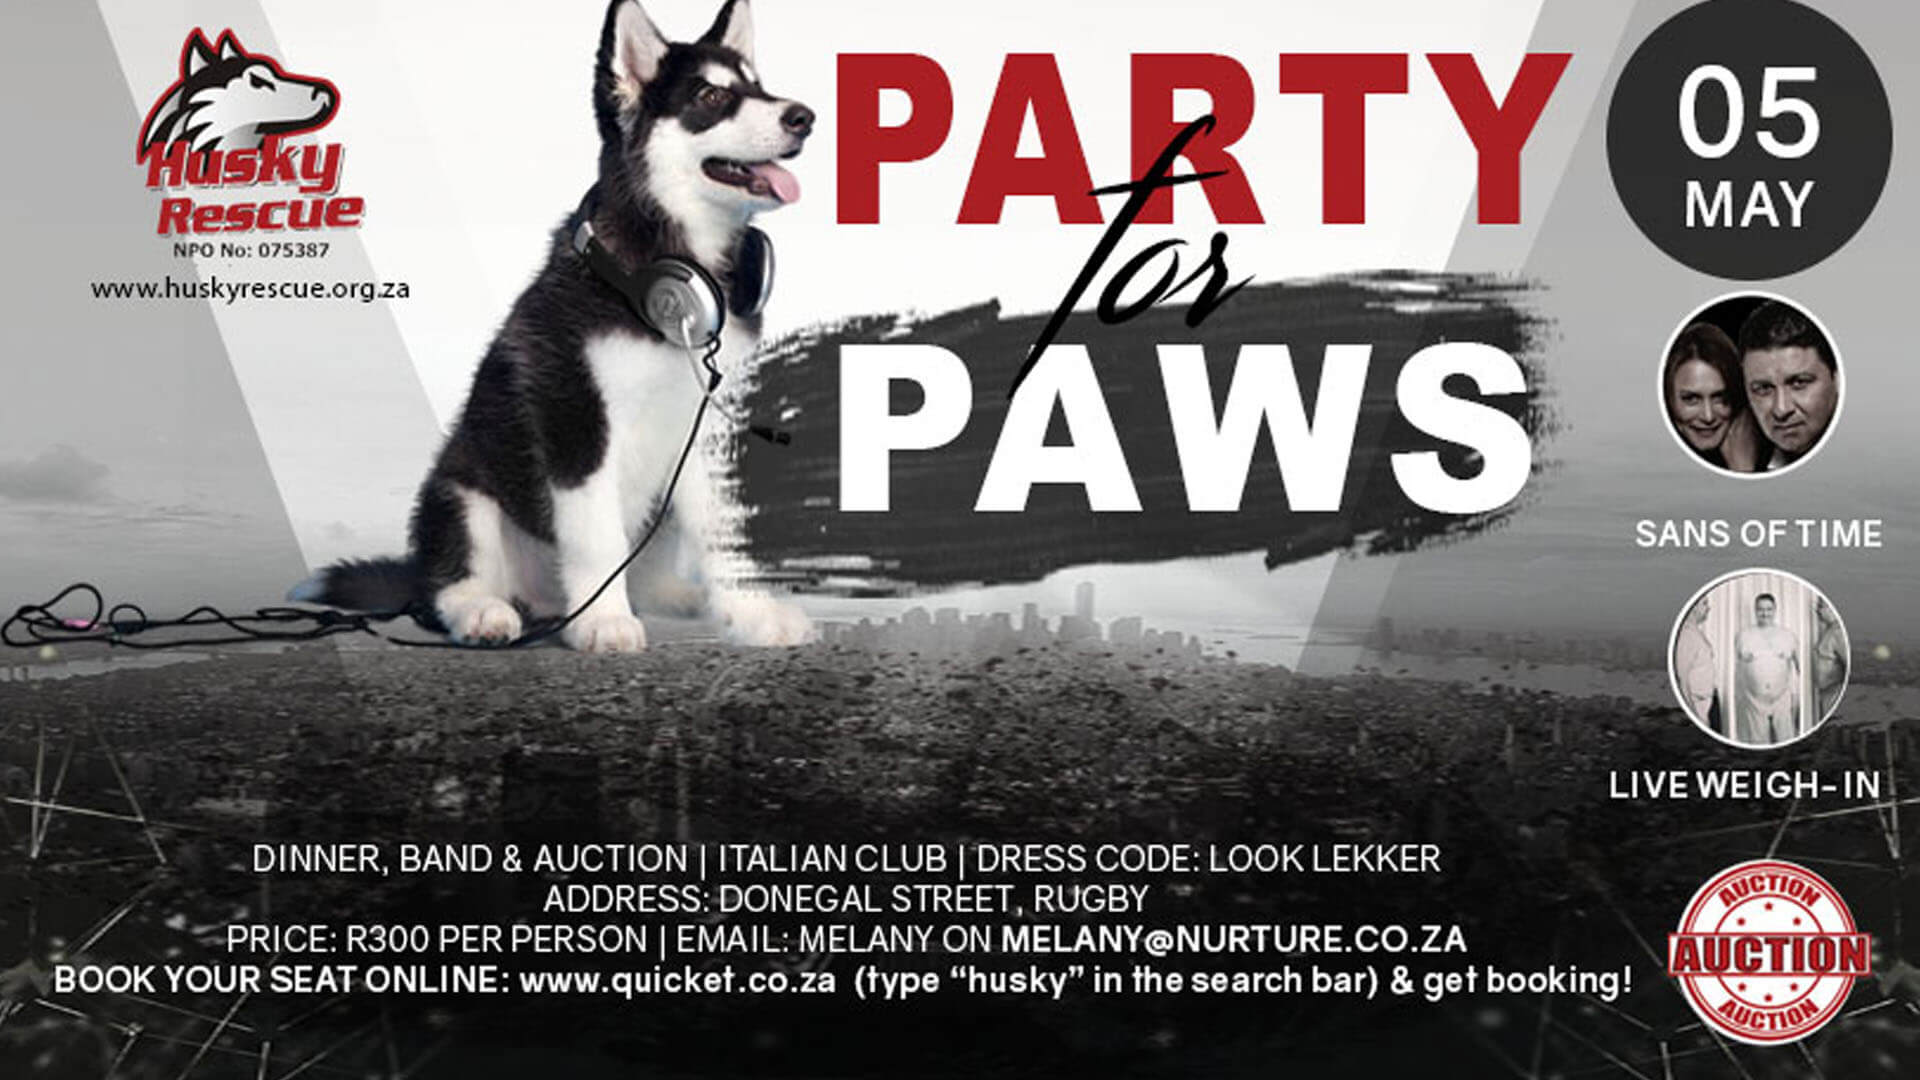 Party for Paws Cape Town - Husky Rescue South Africa